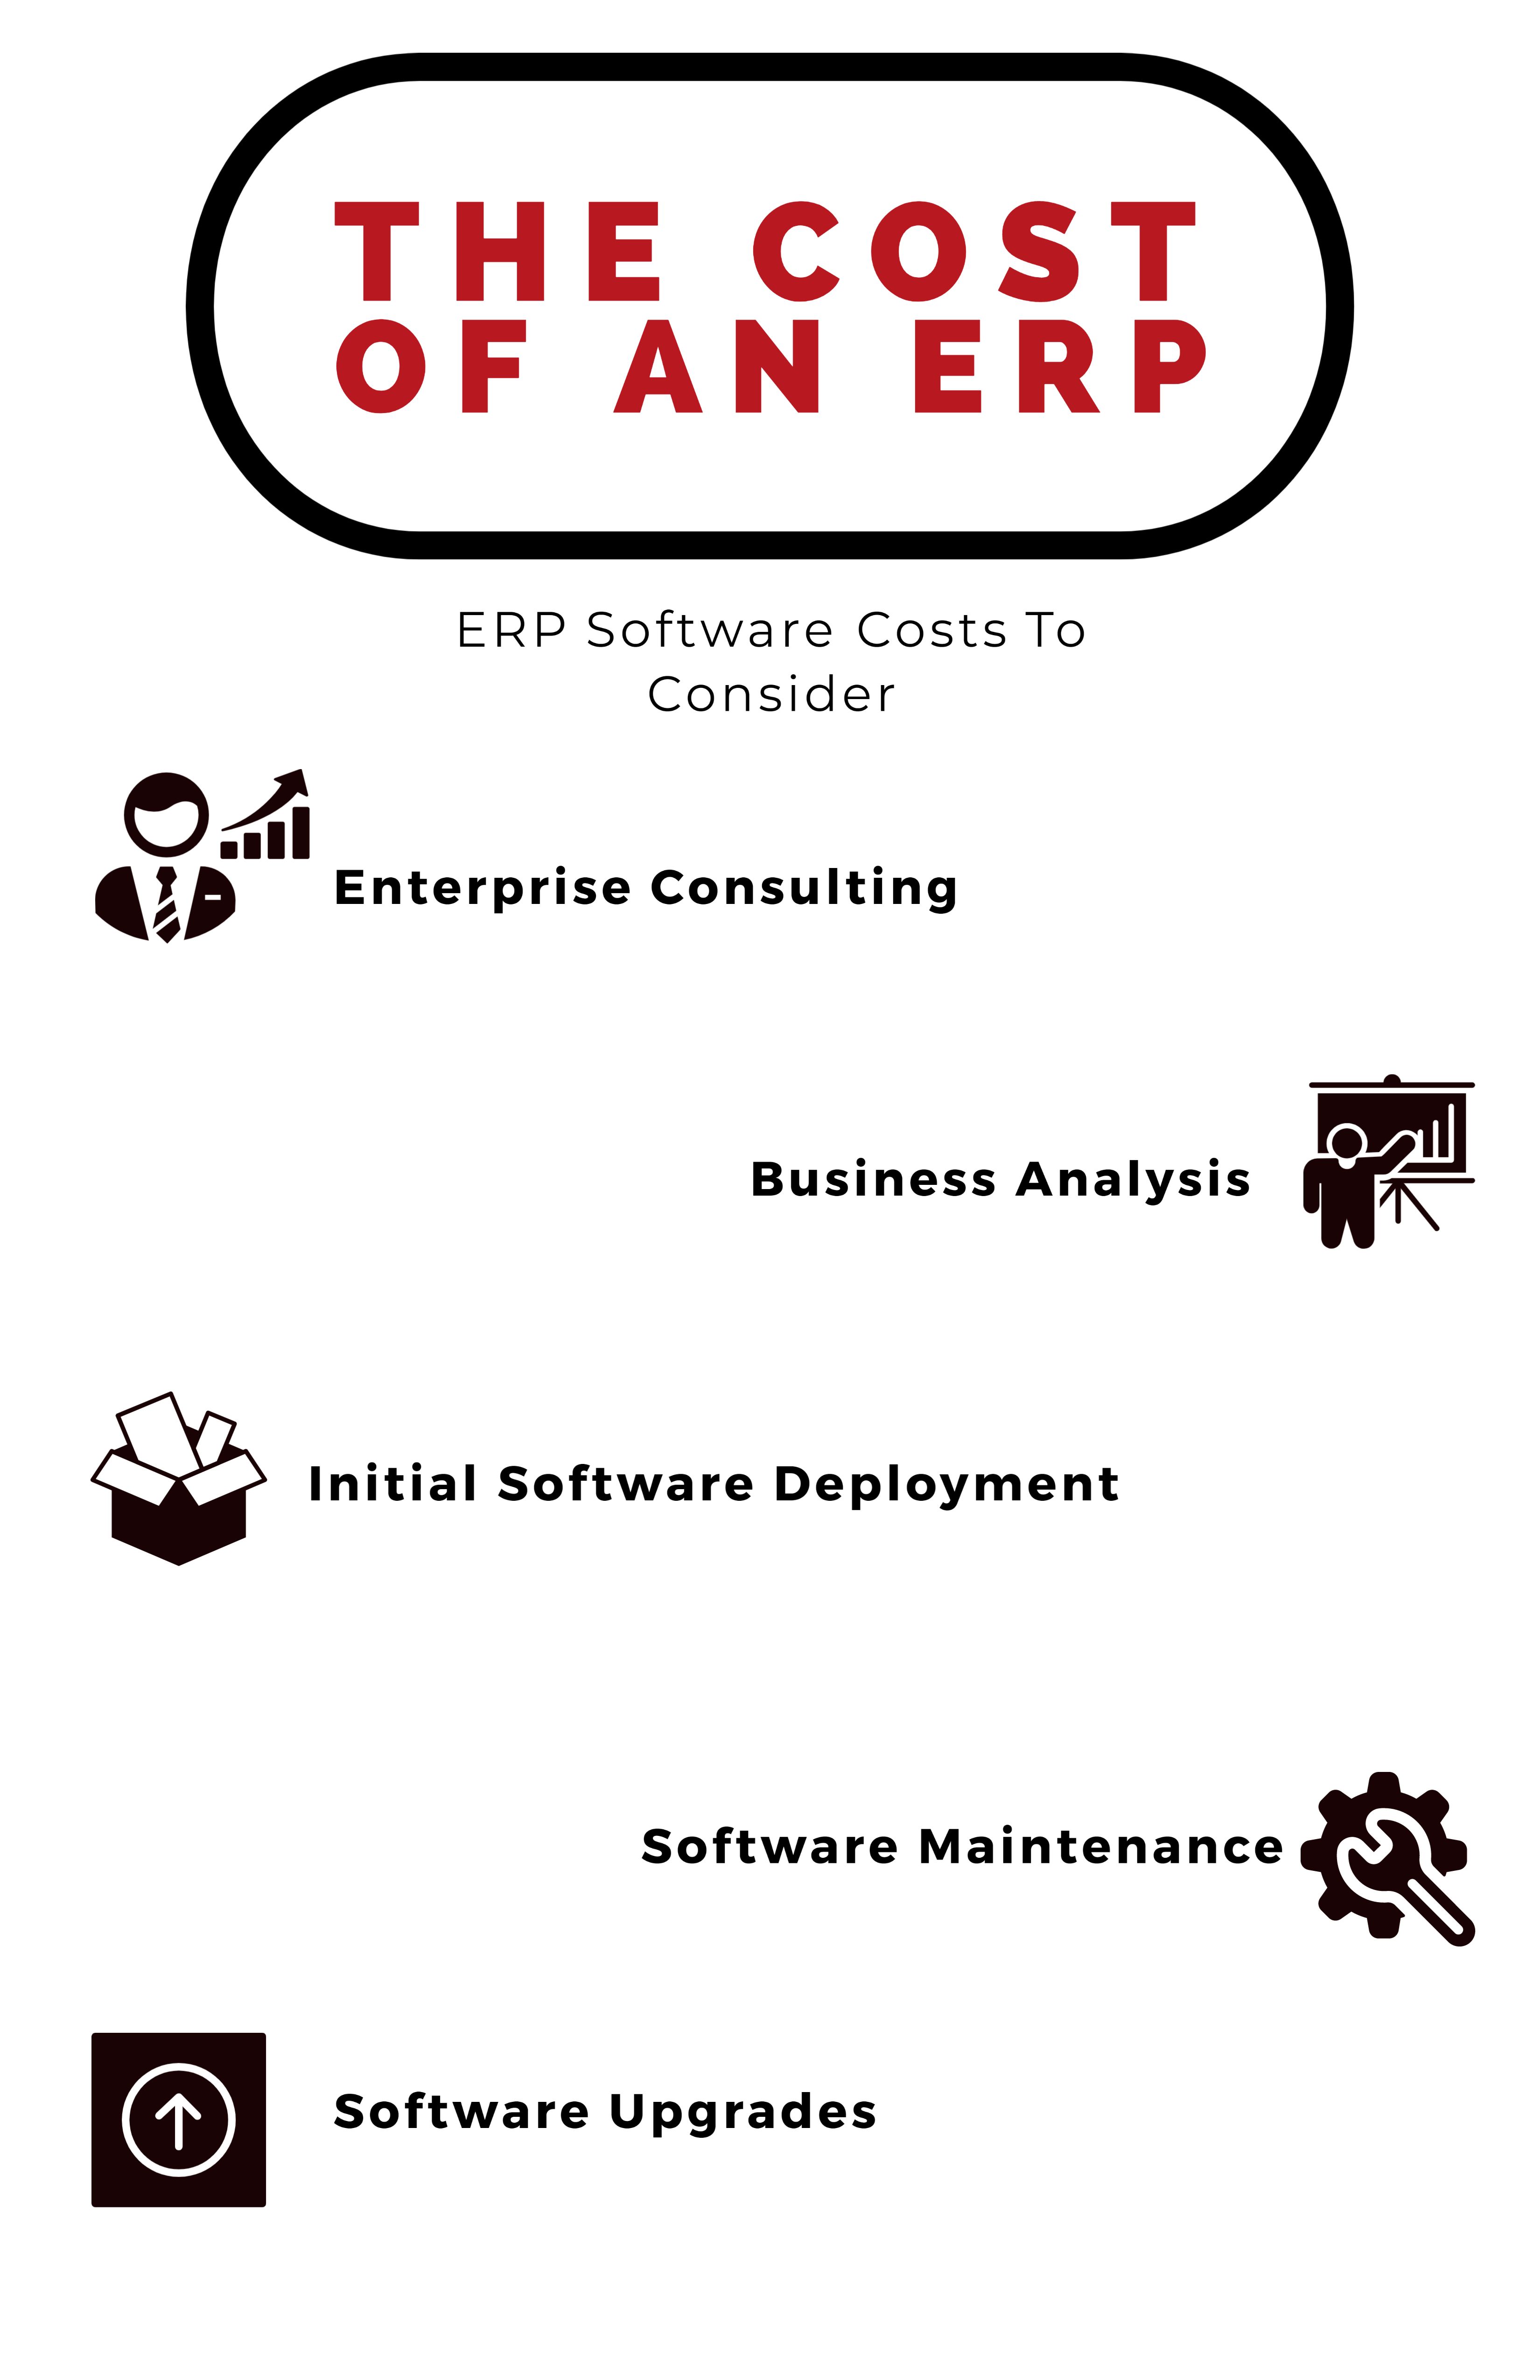 ERP implementation costs and timeline